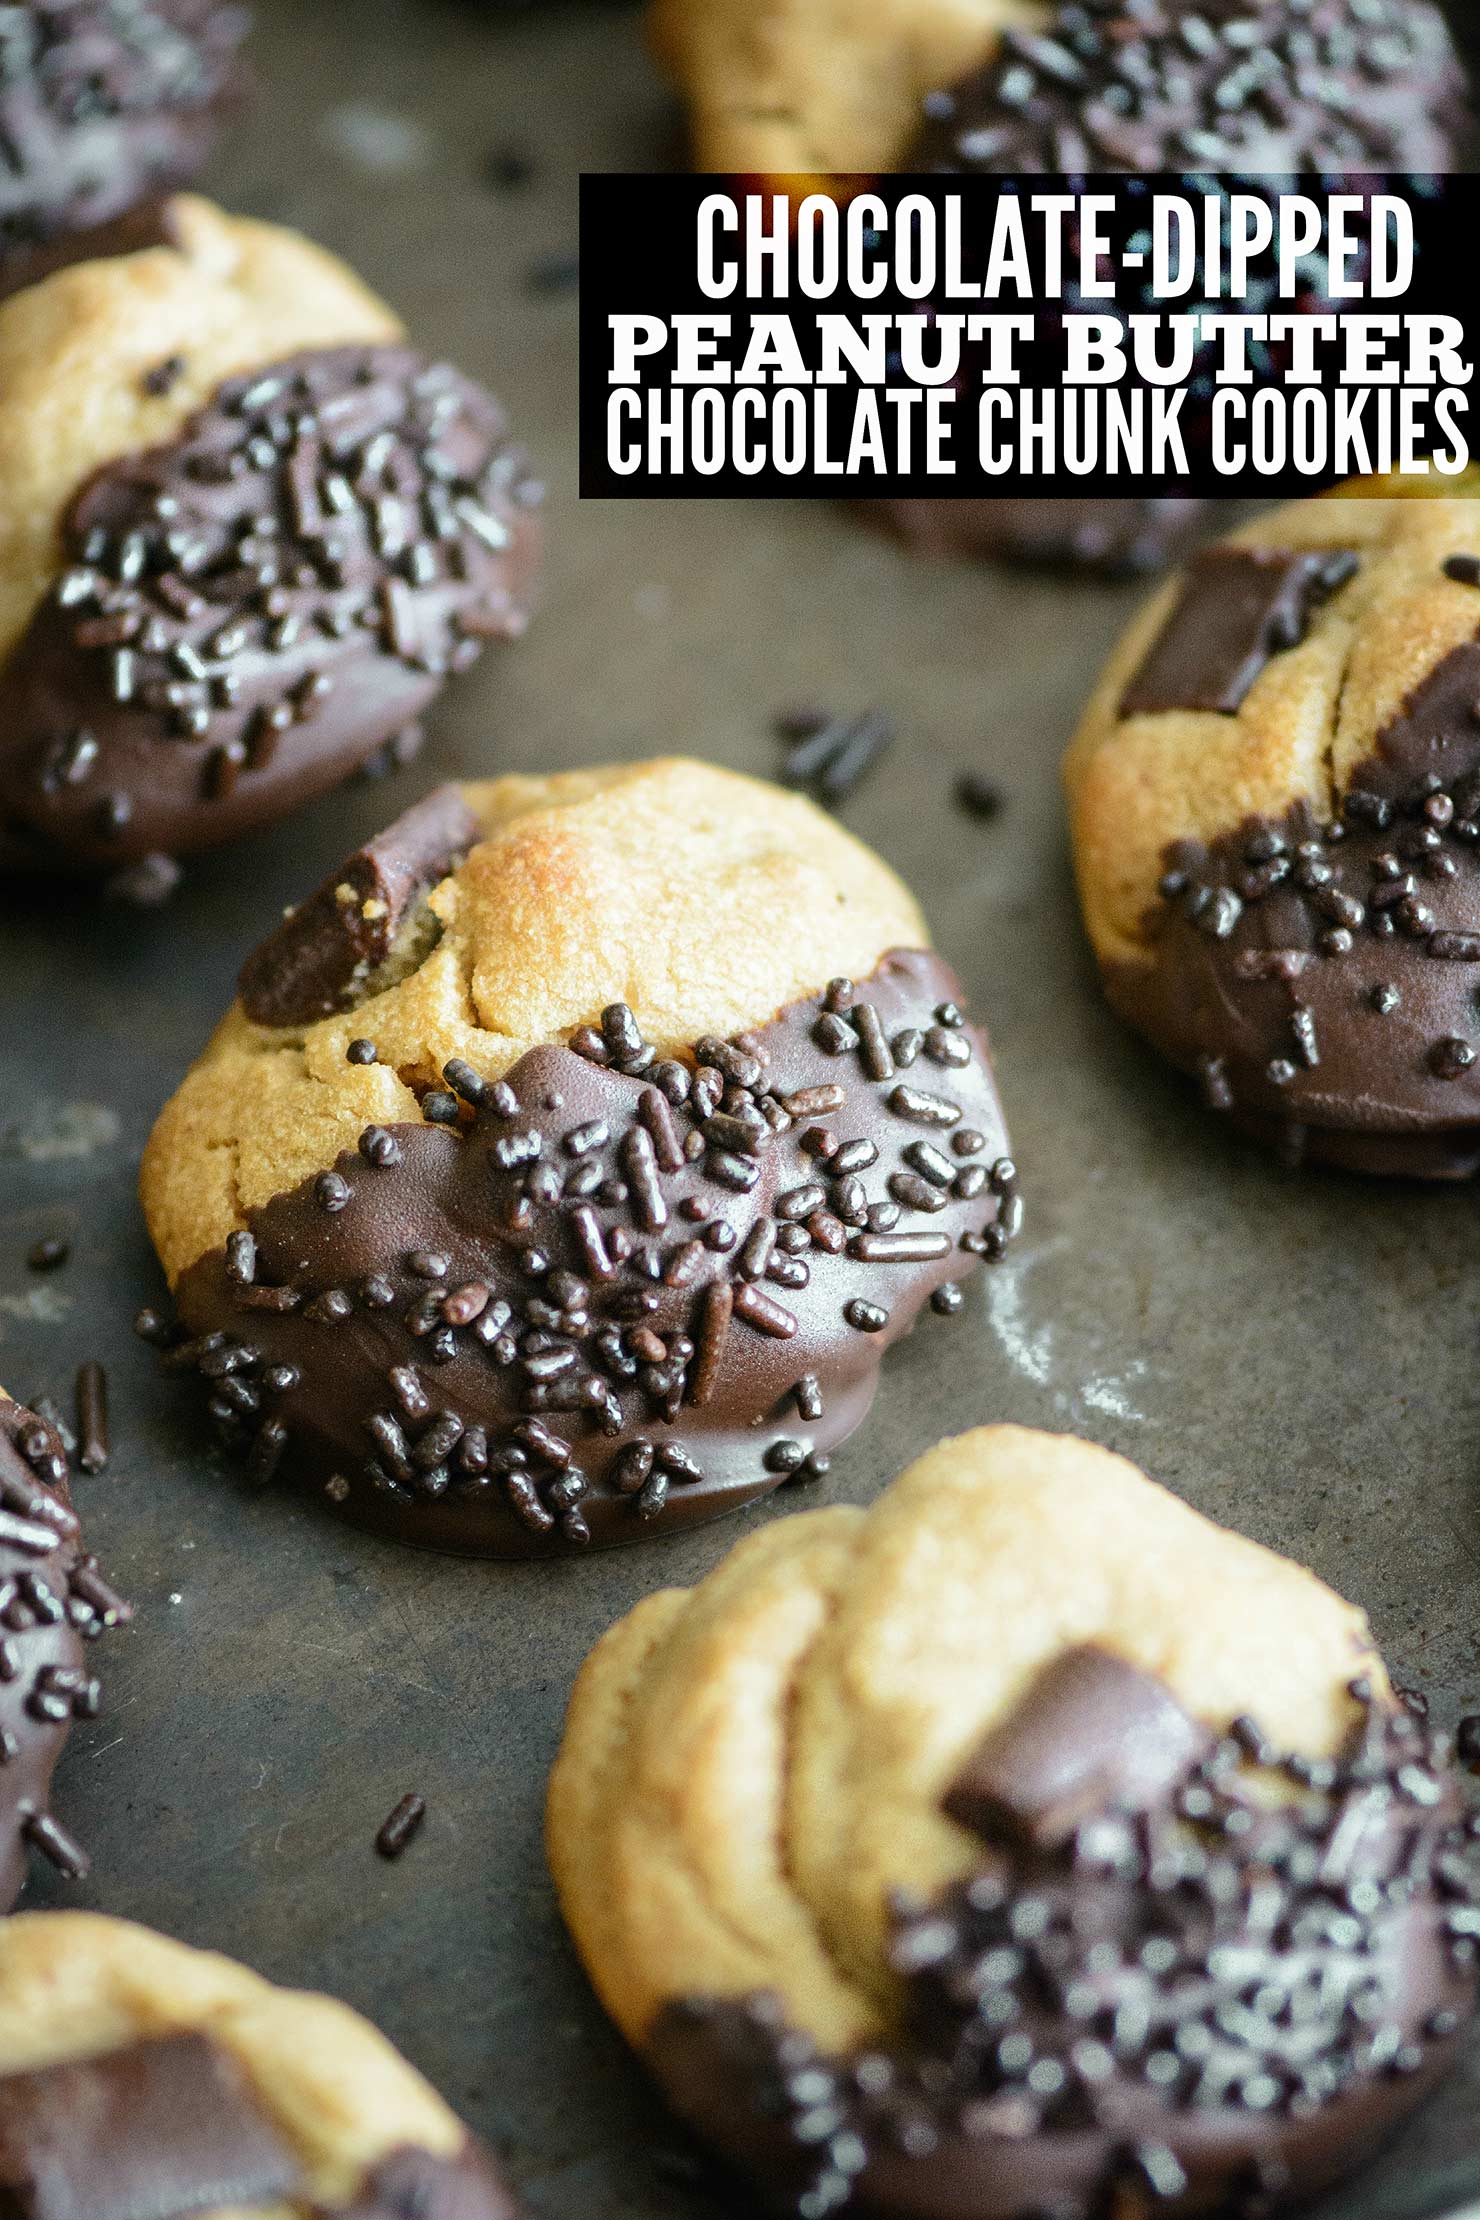 Chocolate-Dipped Peanut Butter Chocolate Chunk Cookies with Dark Chocolate Sprinkles | Kailley's Kitchen